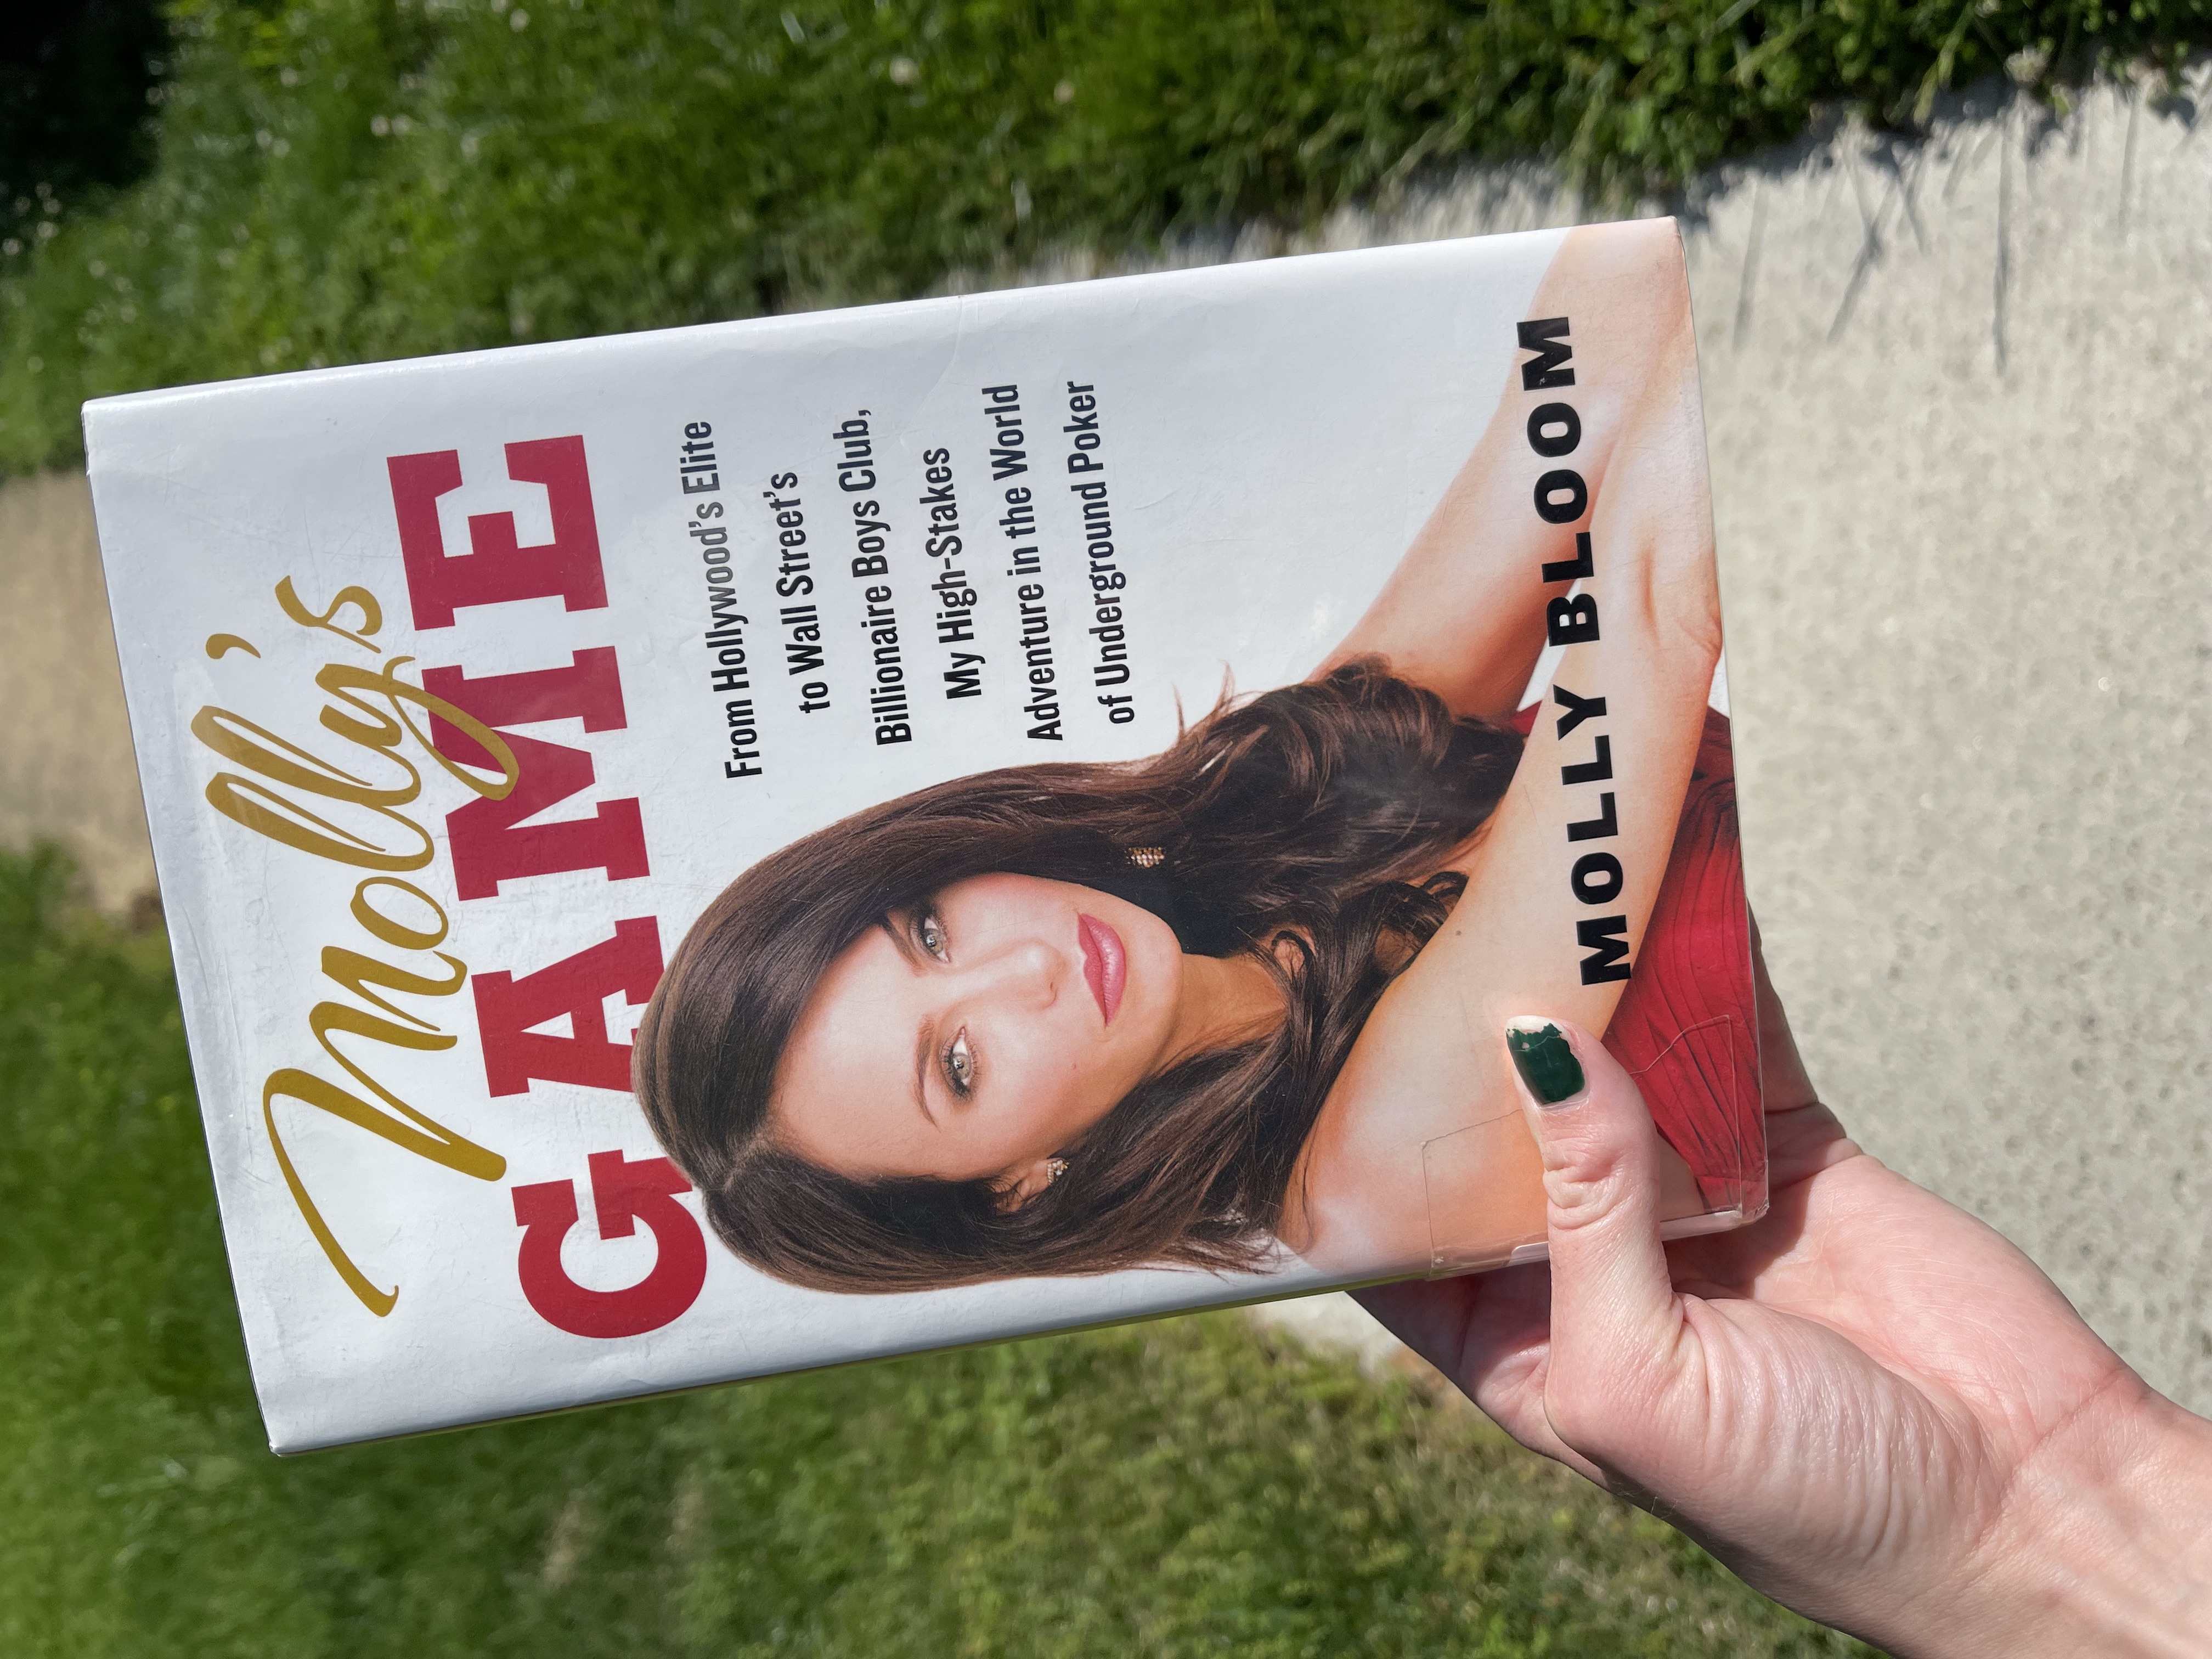 Molly’s Game by Molly Bloom